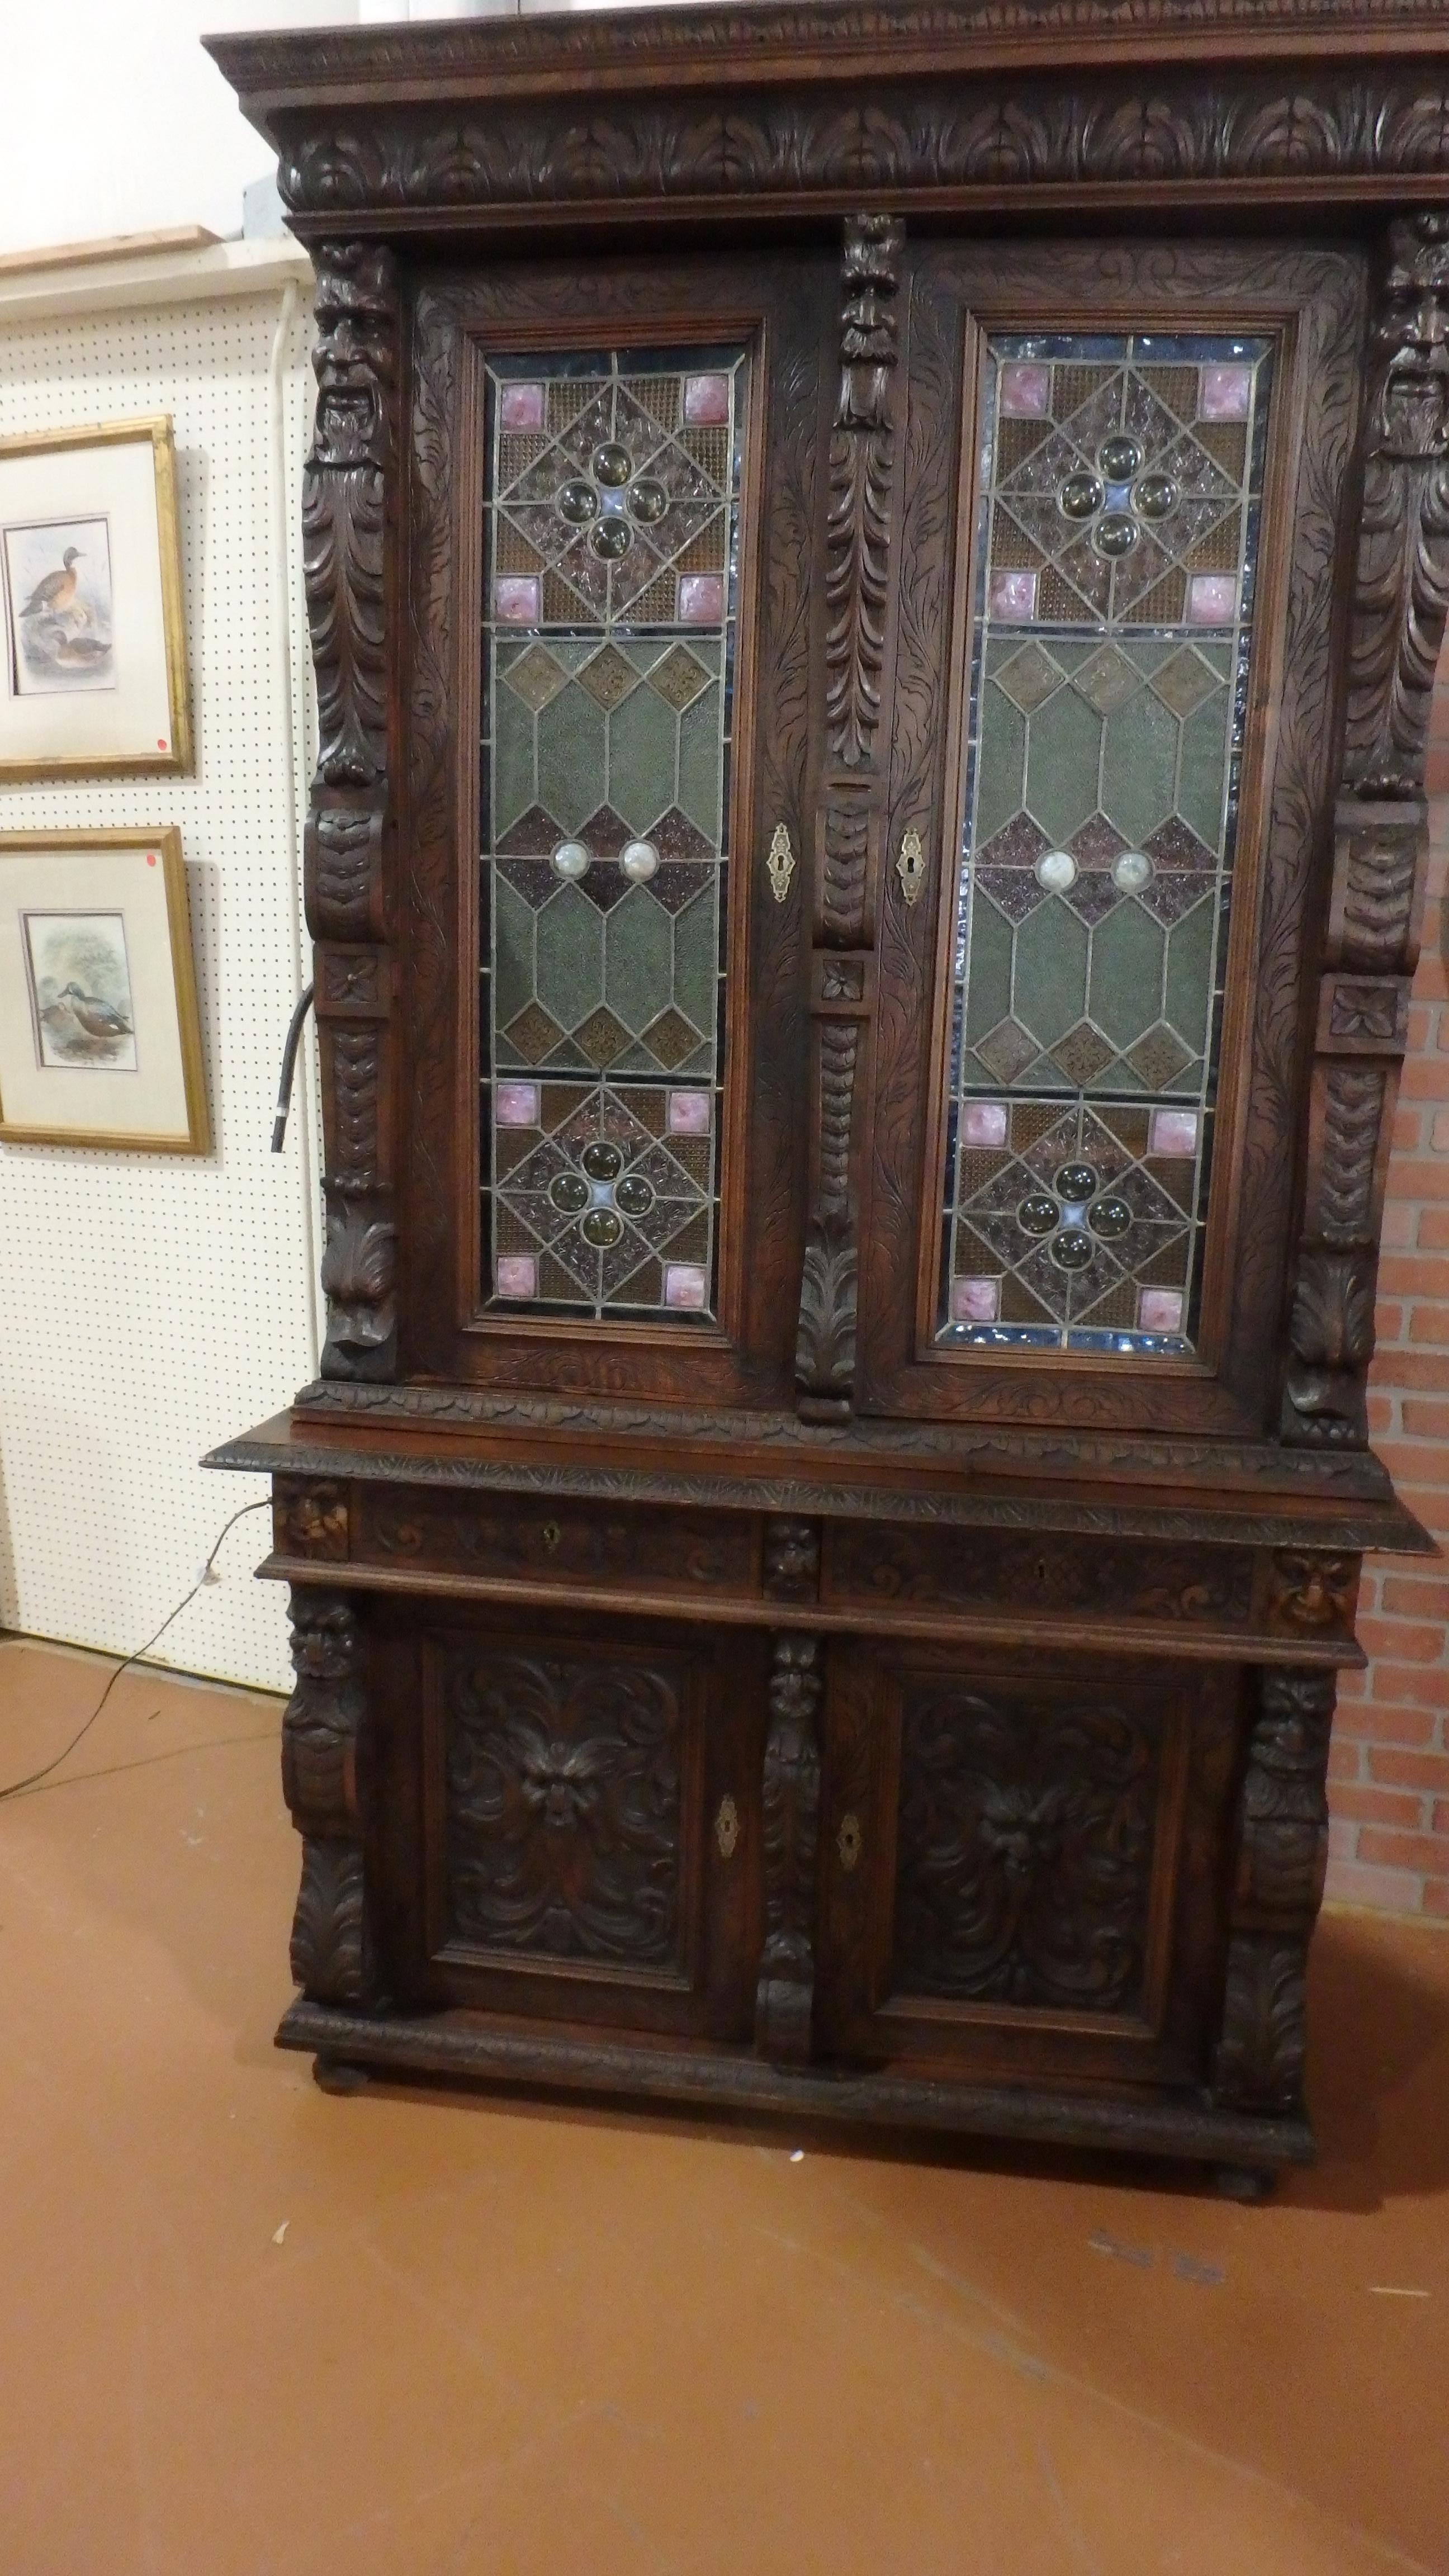 Black Forest Germany early 1800s Renaissance cabinet with hand carving, one of a kind, restored original with three sides stained glass.